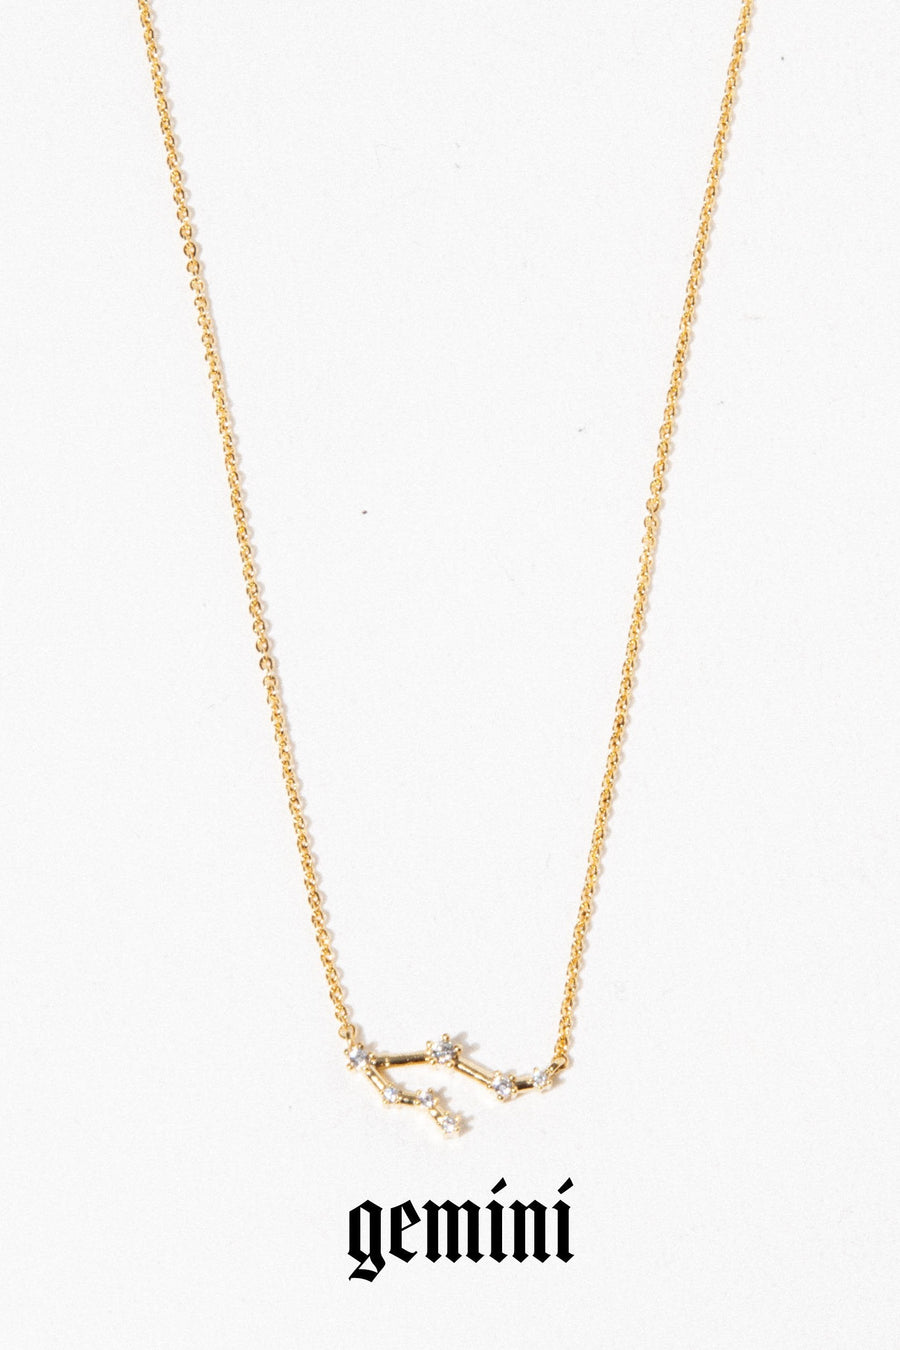 charis Jewelry Gemini / 16 Inches / Gold Constellation Necklace